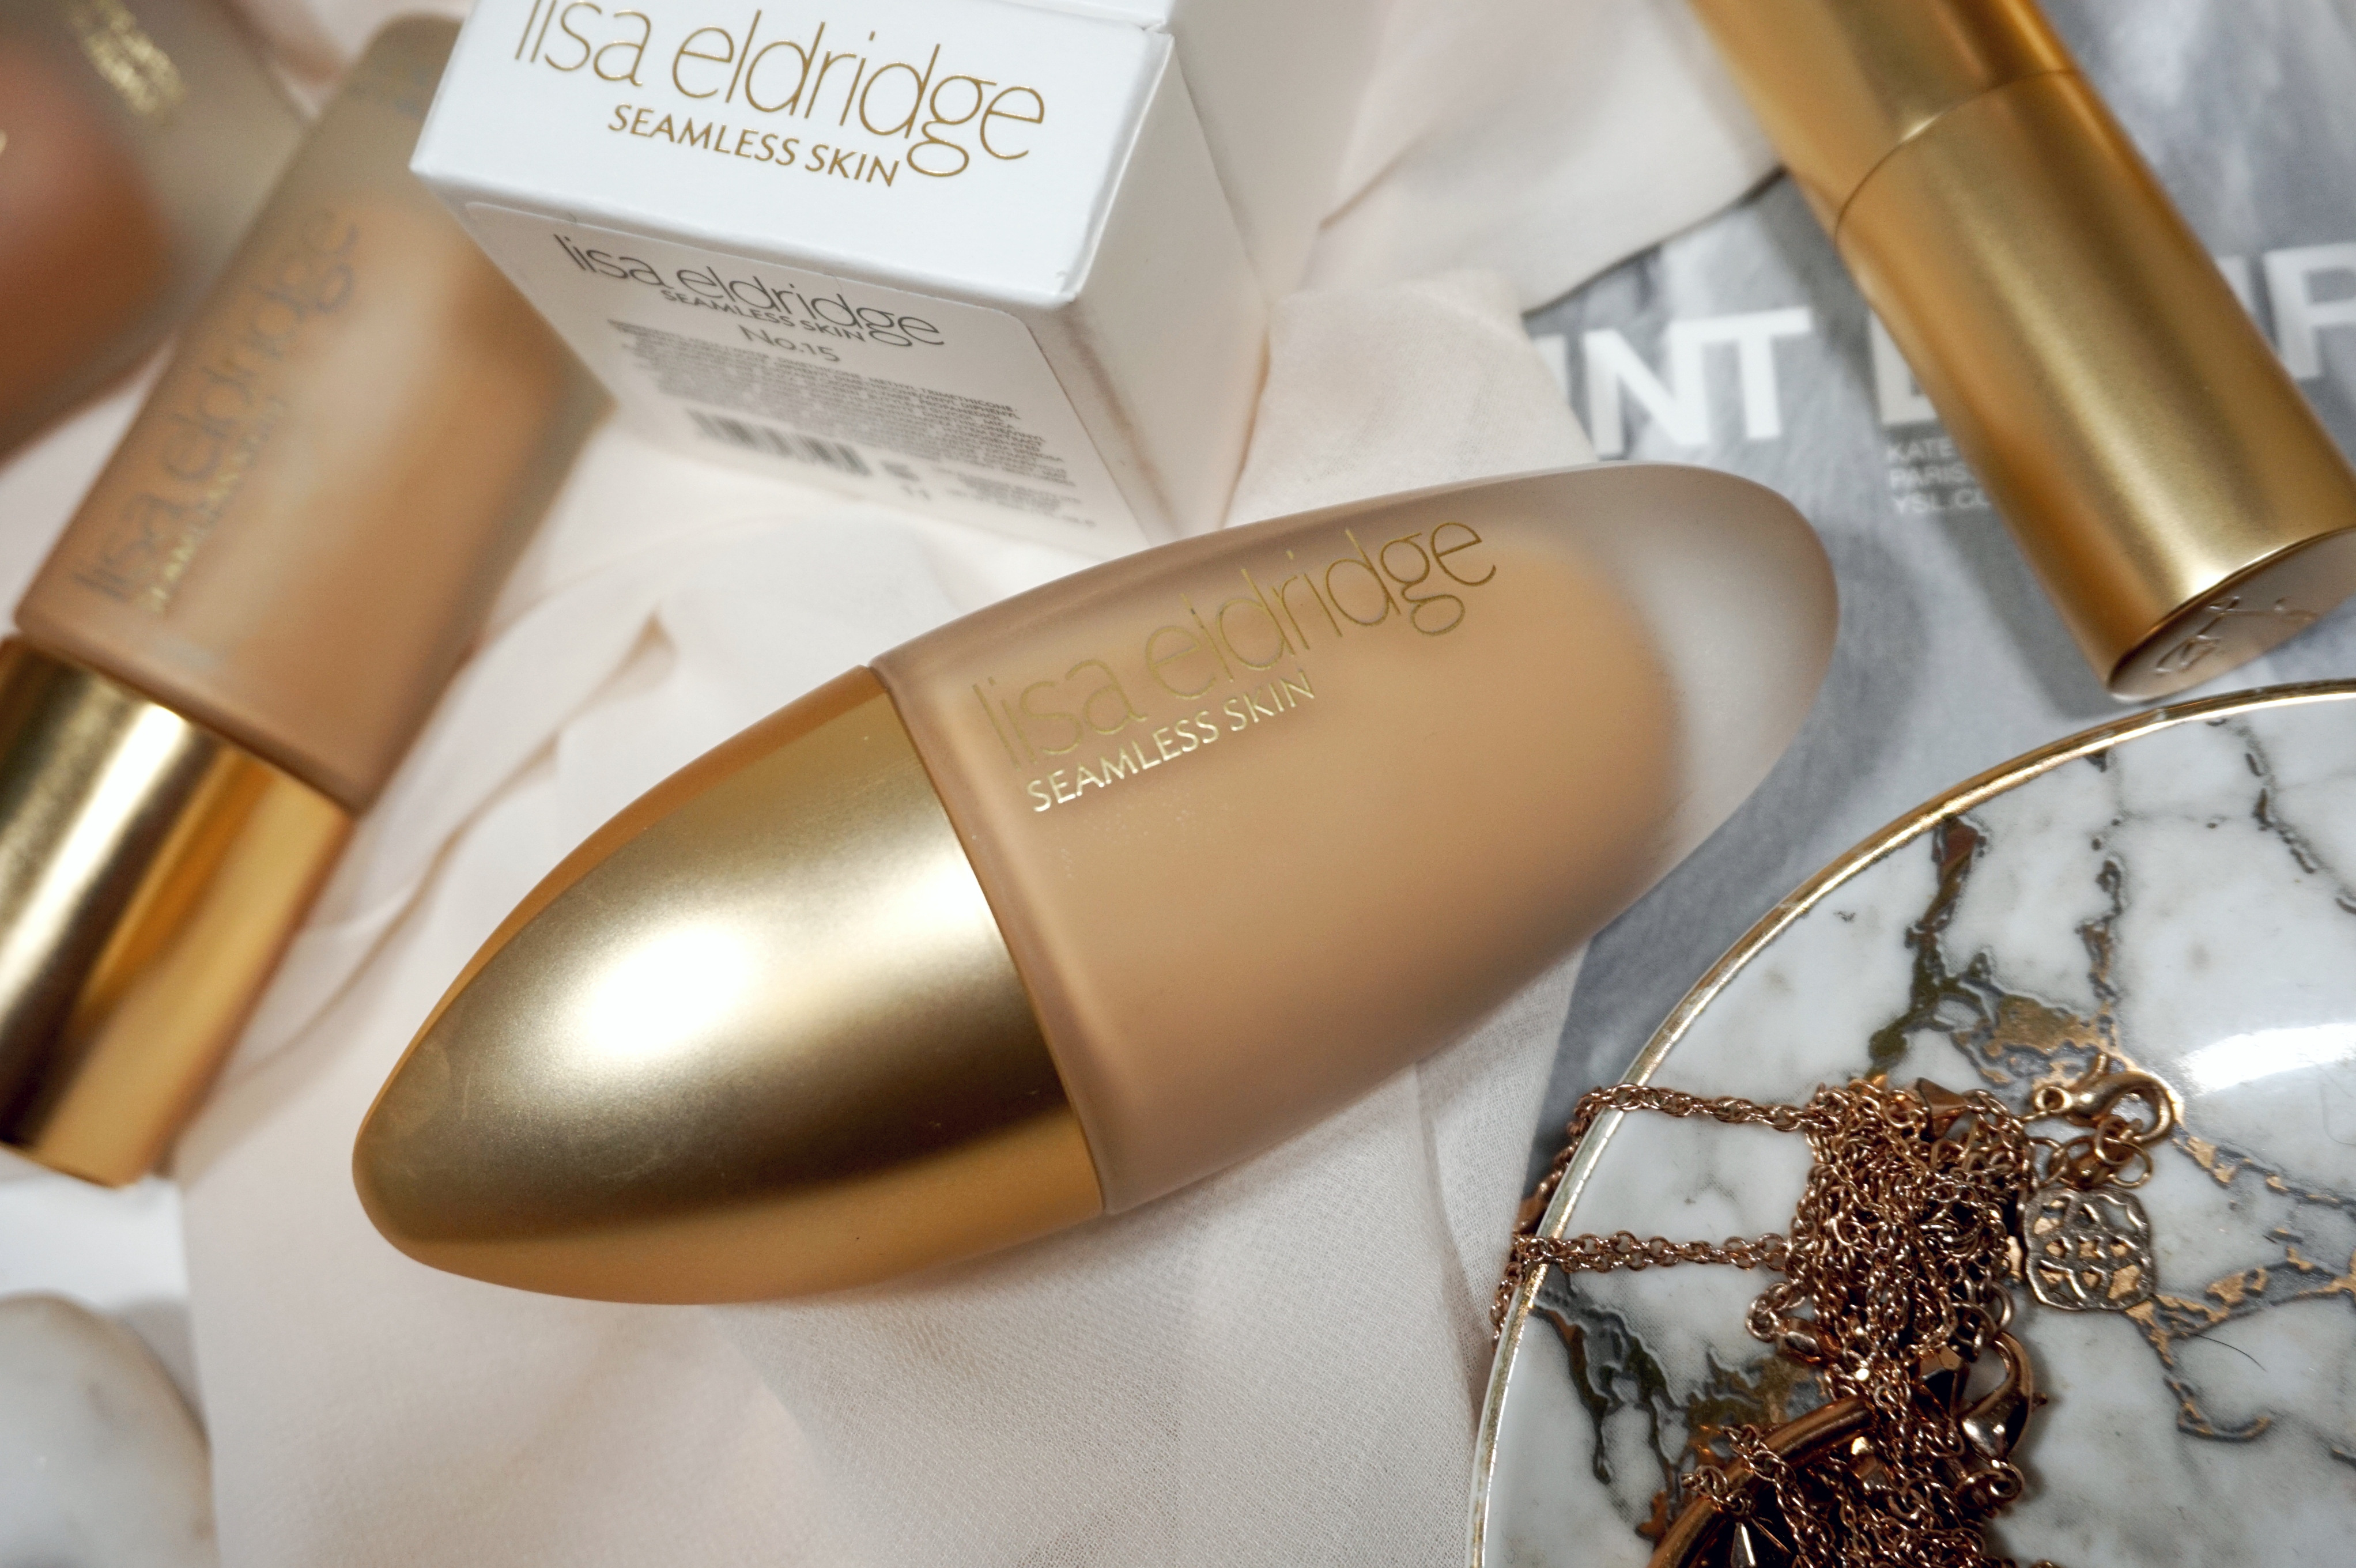 Lisa Eldridge The Foundation - Seamless Skin Review and Swatches